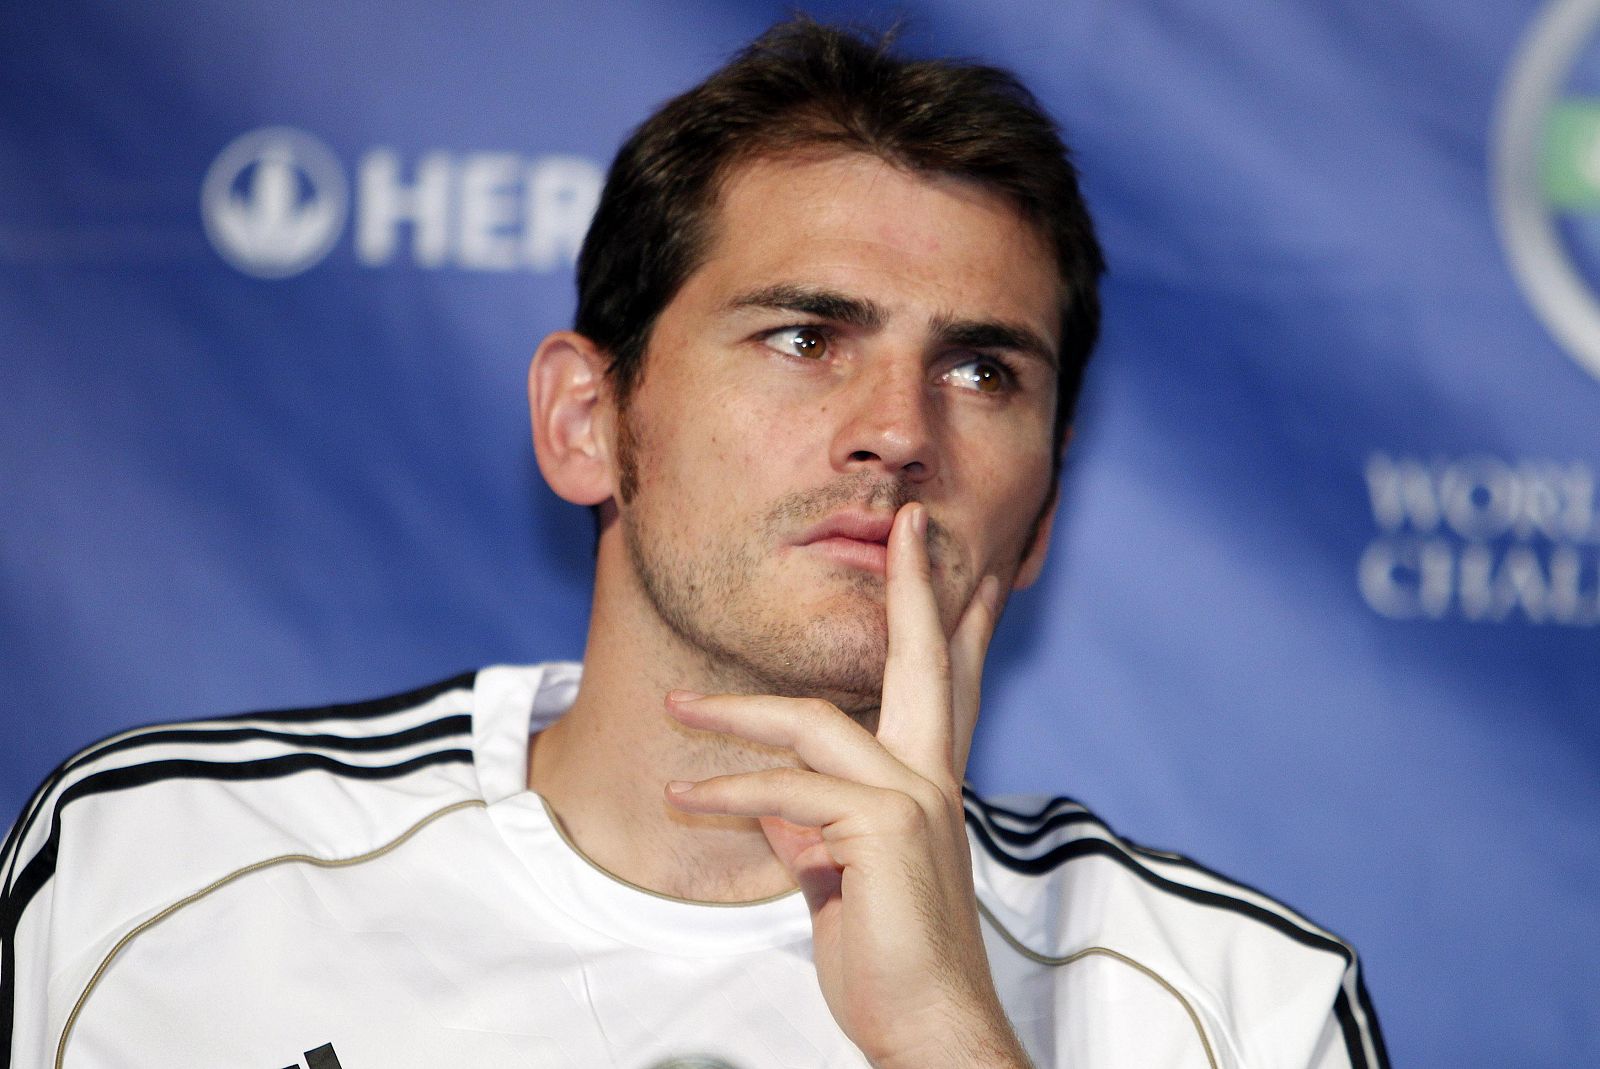 Real Madrid's Casillas listens to questions from the media at a news conference in Los Angeles